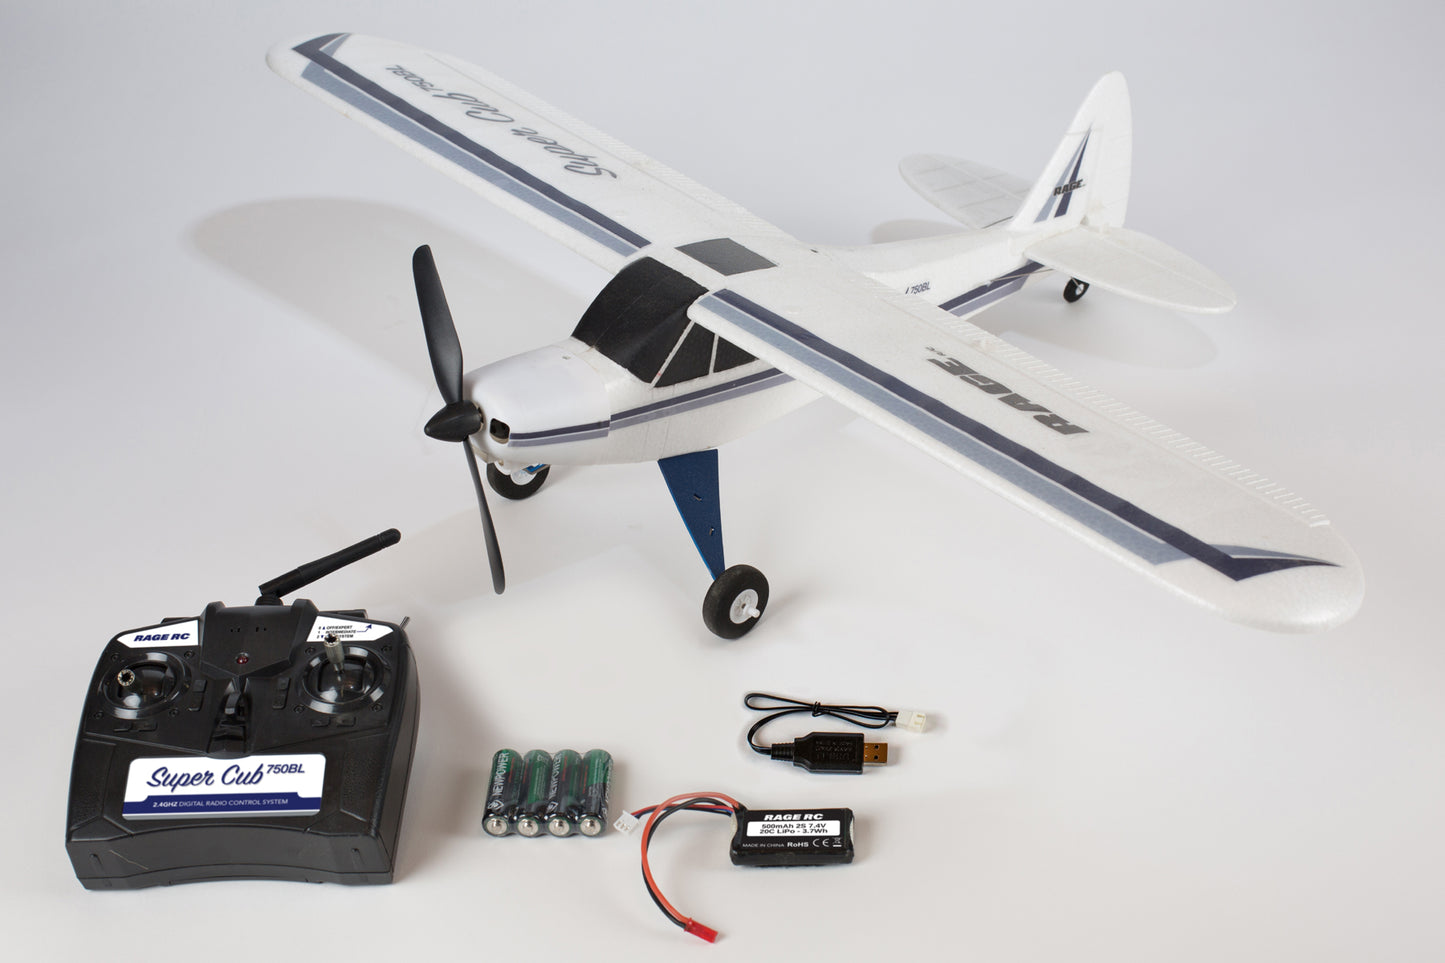 Super Cub 750 Brushless RTF 4-Channel Aircraft with PASS (Pilot Assist Stability Software) System